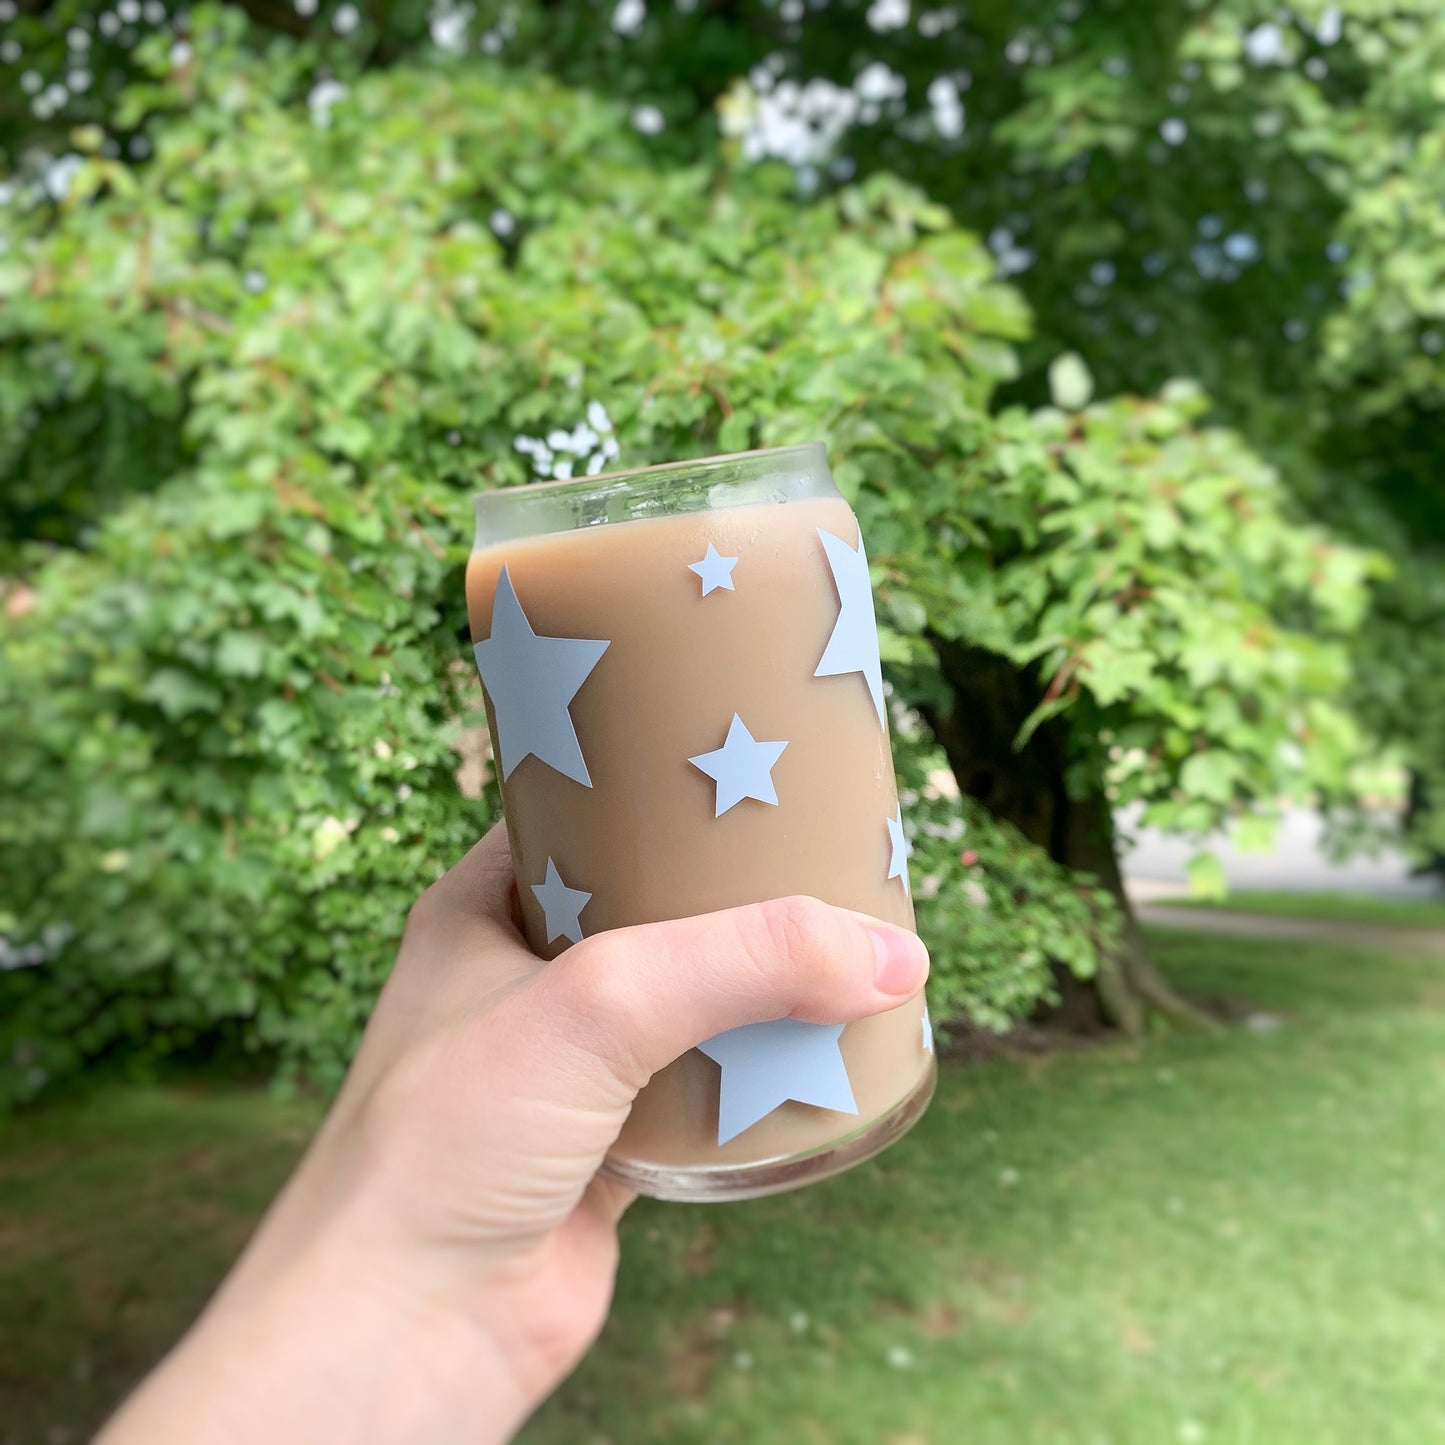 Hand holding star glass filled with iced coffee in front of greenery.